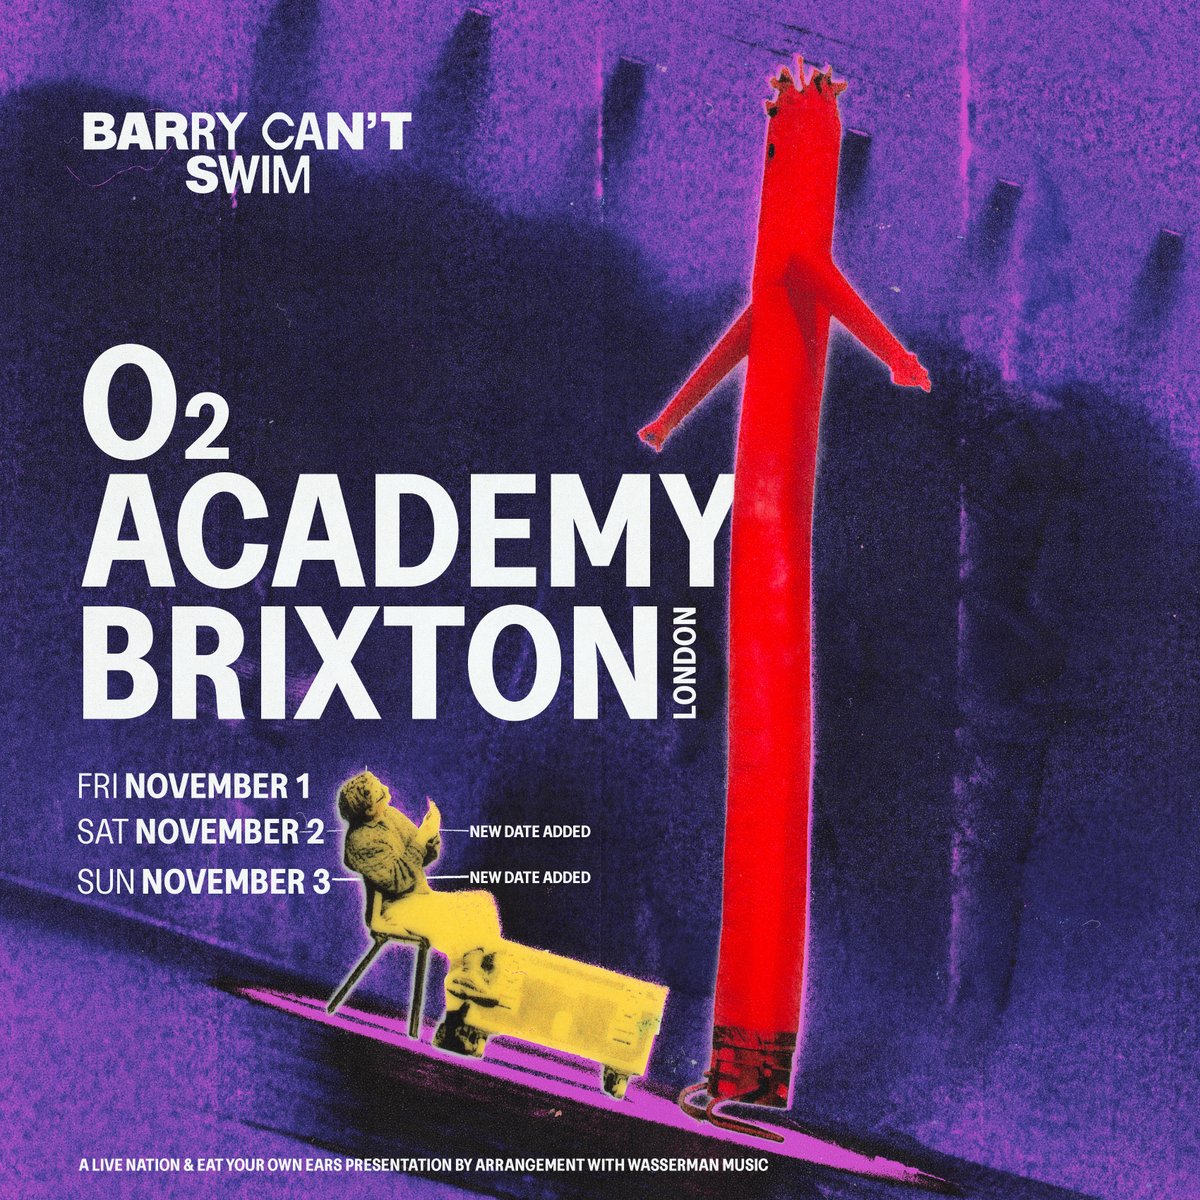 Due to phenomenal demand, Barry Can't Swim has announced 2 added dates at O2 Academy Brixton for this November. 📅 Get your tickets Friday >> bit.ly/3VY3re6